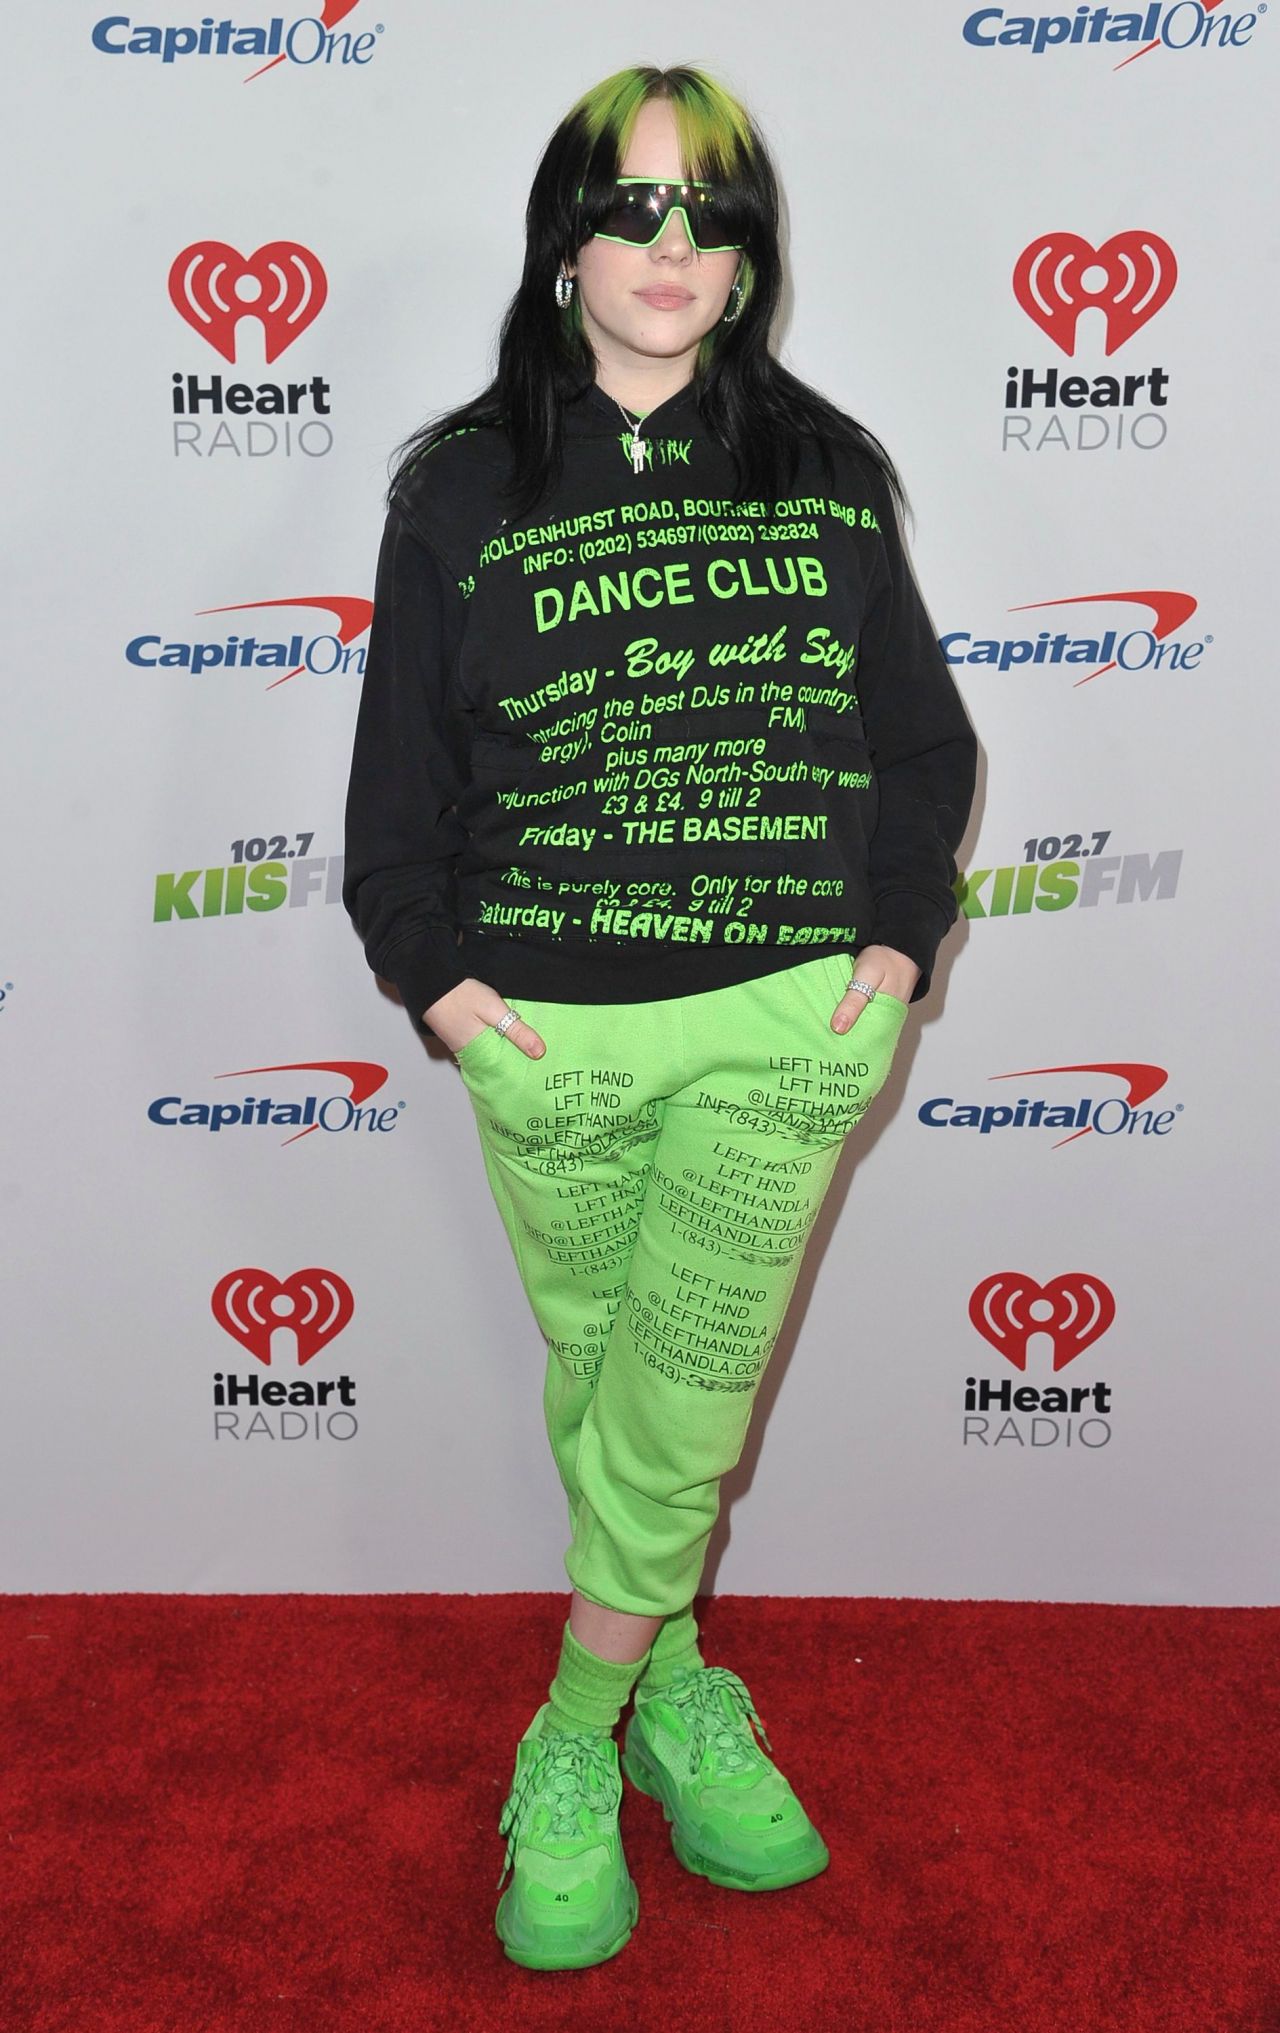 billie-eilish-on-the-redcarpet-2019-jingle-ball-in-los-angeles